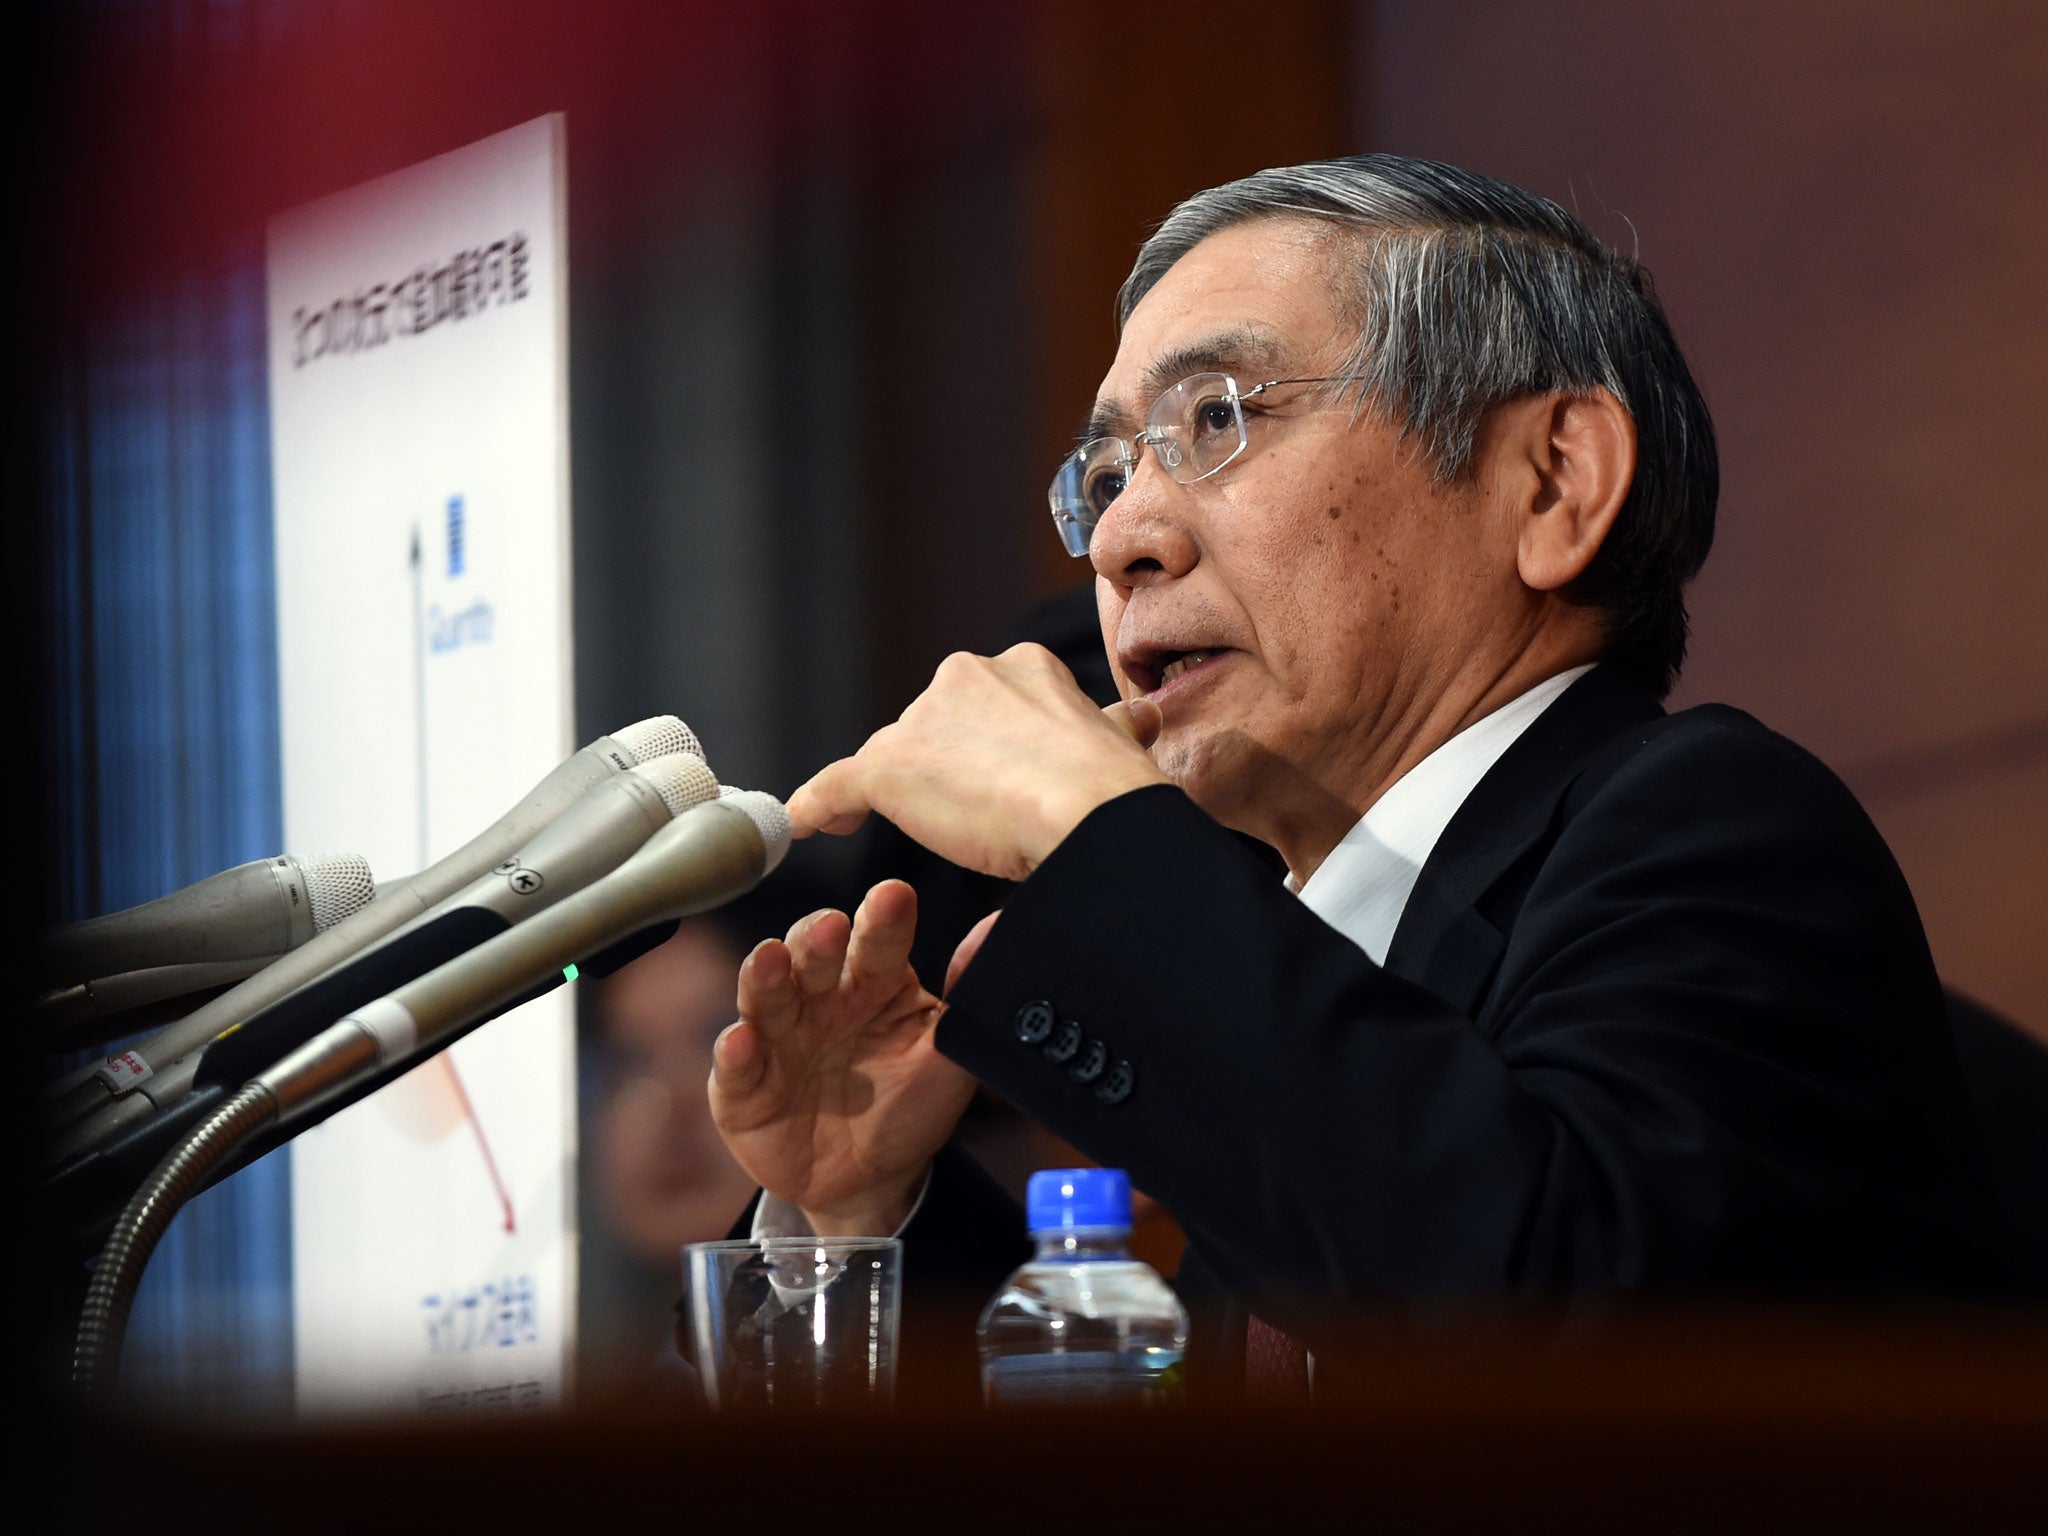 Governor of the Bank of Japan (BoJ) Haruhiko Kuroda answers a question during his regular press conference in Tokyo on January 29, 2016. The BoJ shocked markets on January 29 after it unveiled plans to effectively charge lenders to park their cash with it, ramping up its long-running battle to kickstart the world's number three economy.